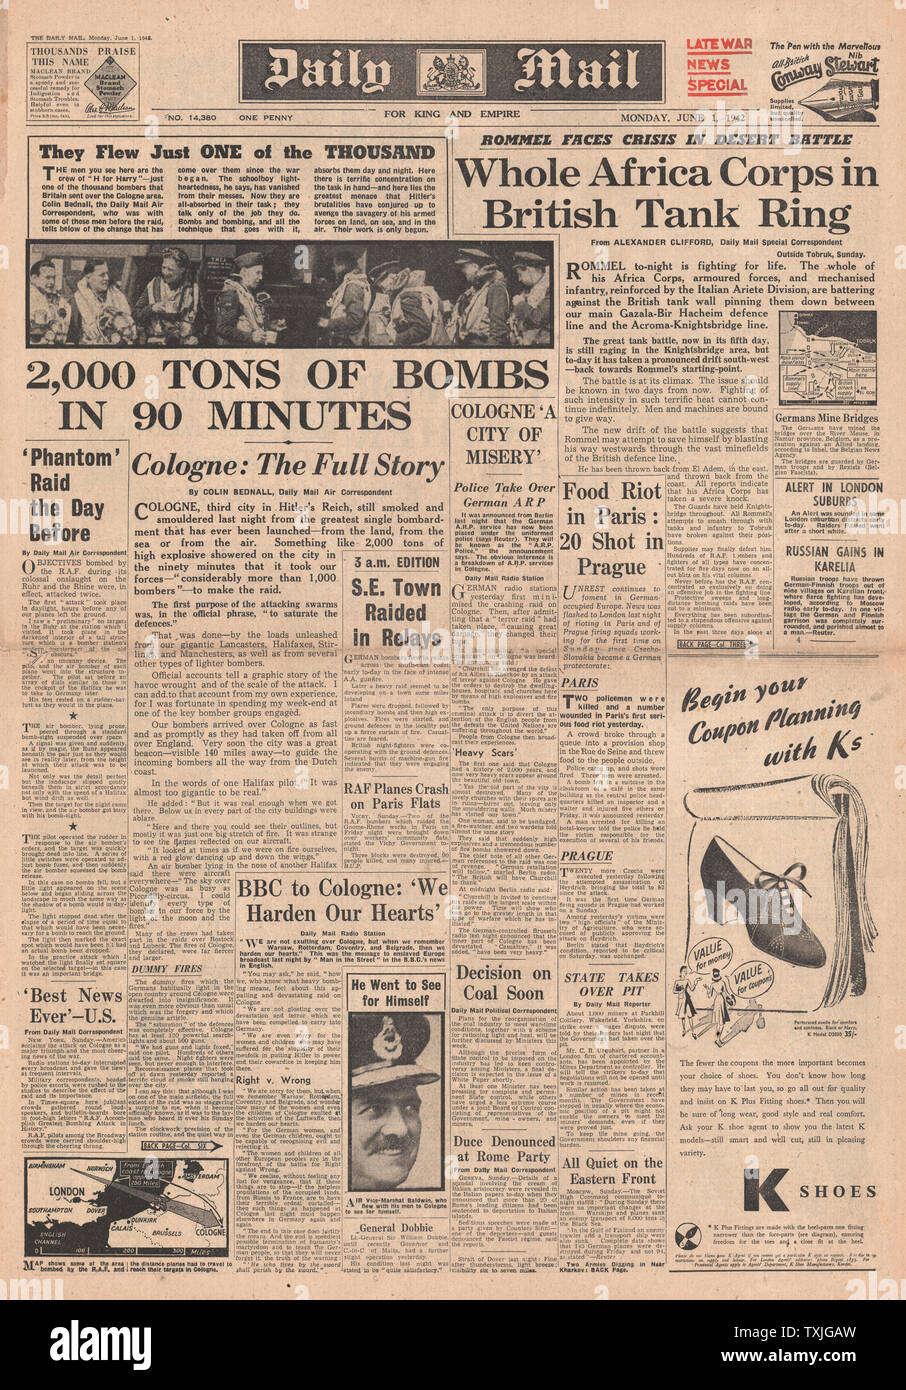 1942 front page Daily Mail RAF Carry out first 1,000 Bomber Raid on Cologne and Battle for Libya Stock Photo